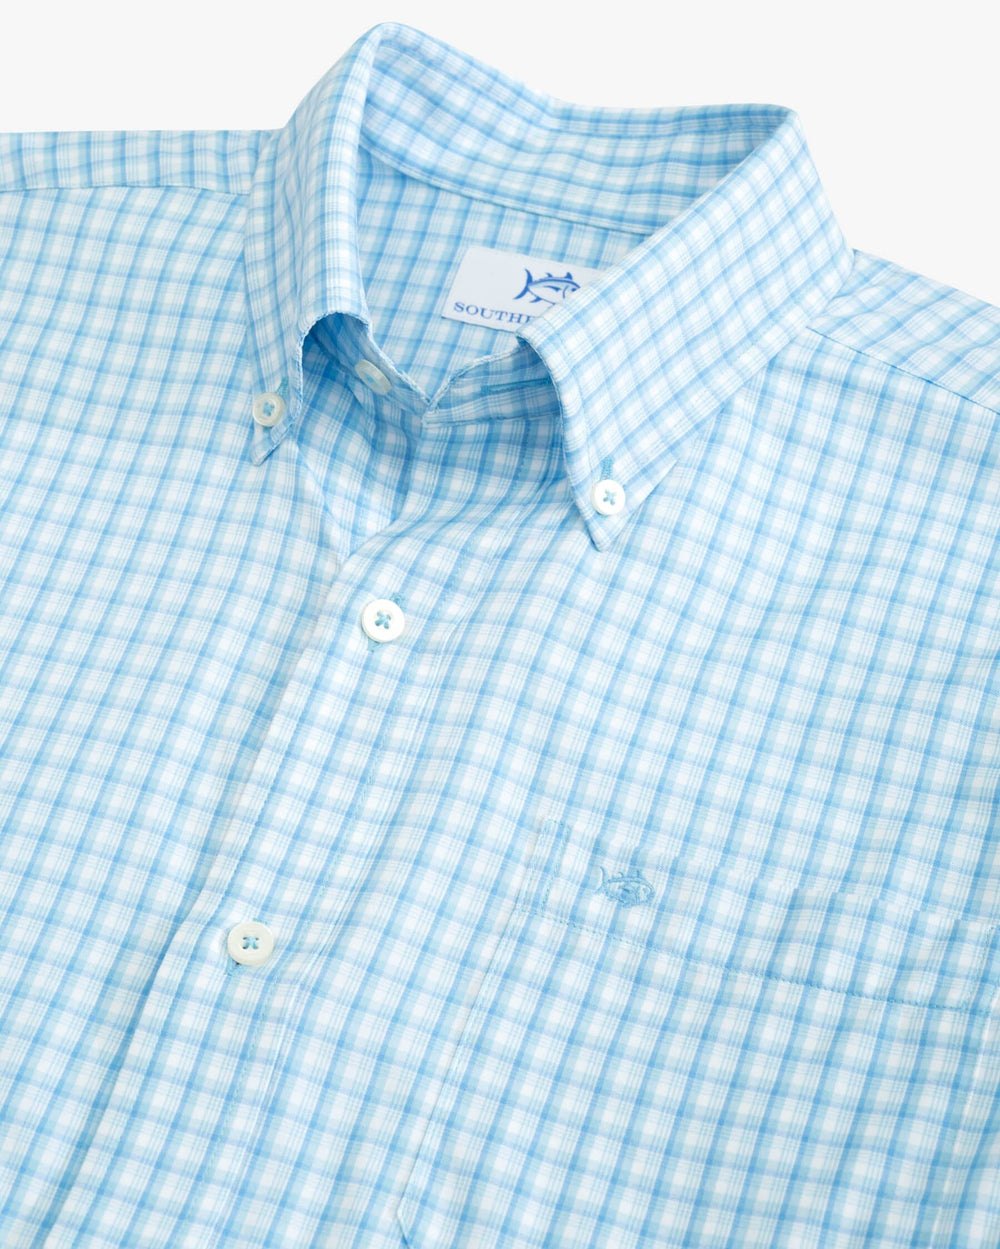 The detail view of the Southern Tide brrr Skycrest Plaid Intercoastal Sport Shirt by Southern Tide - Rain Water